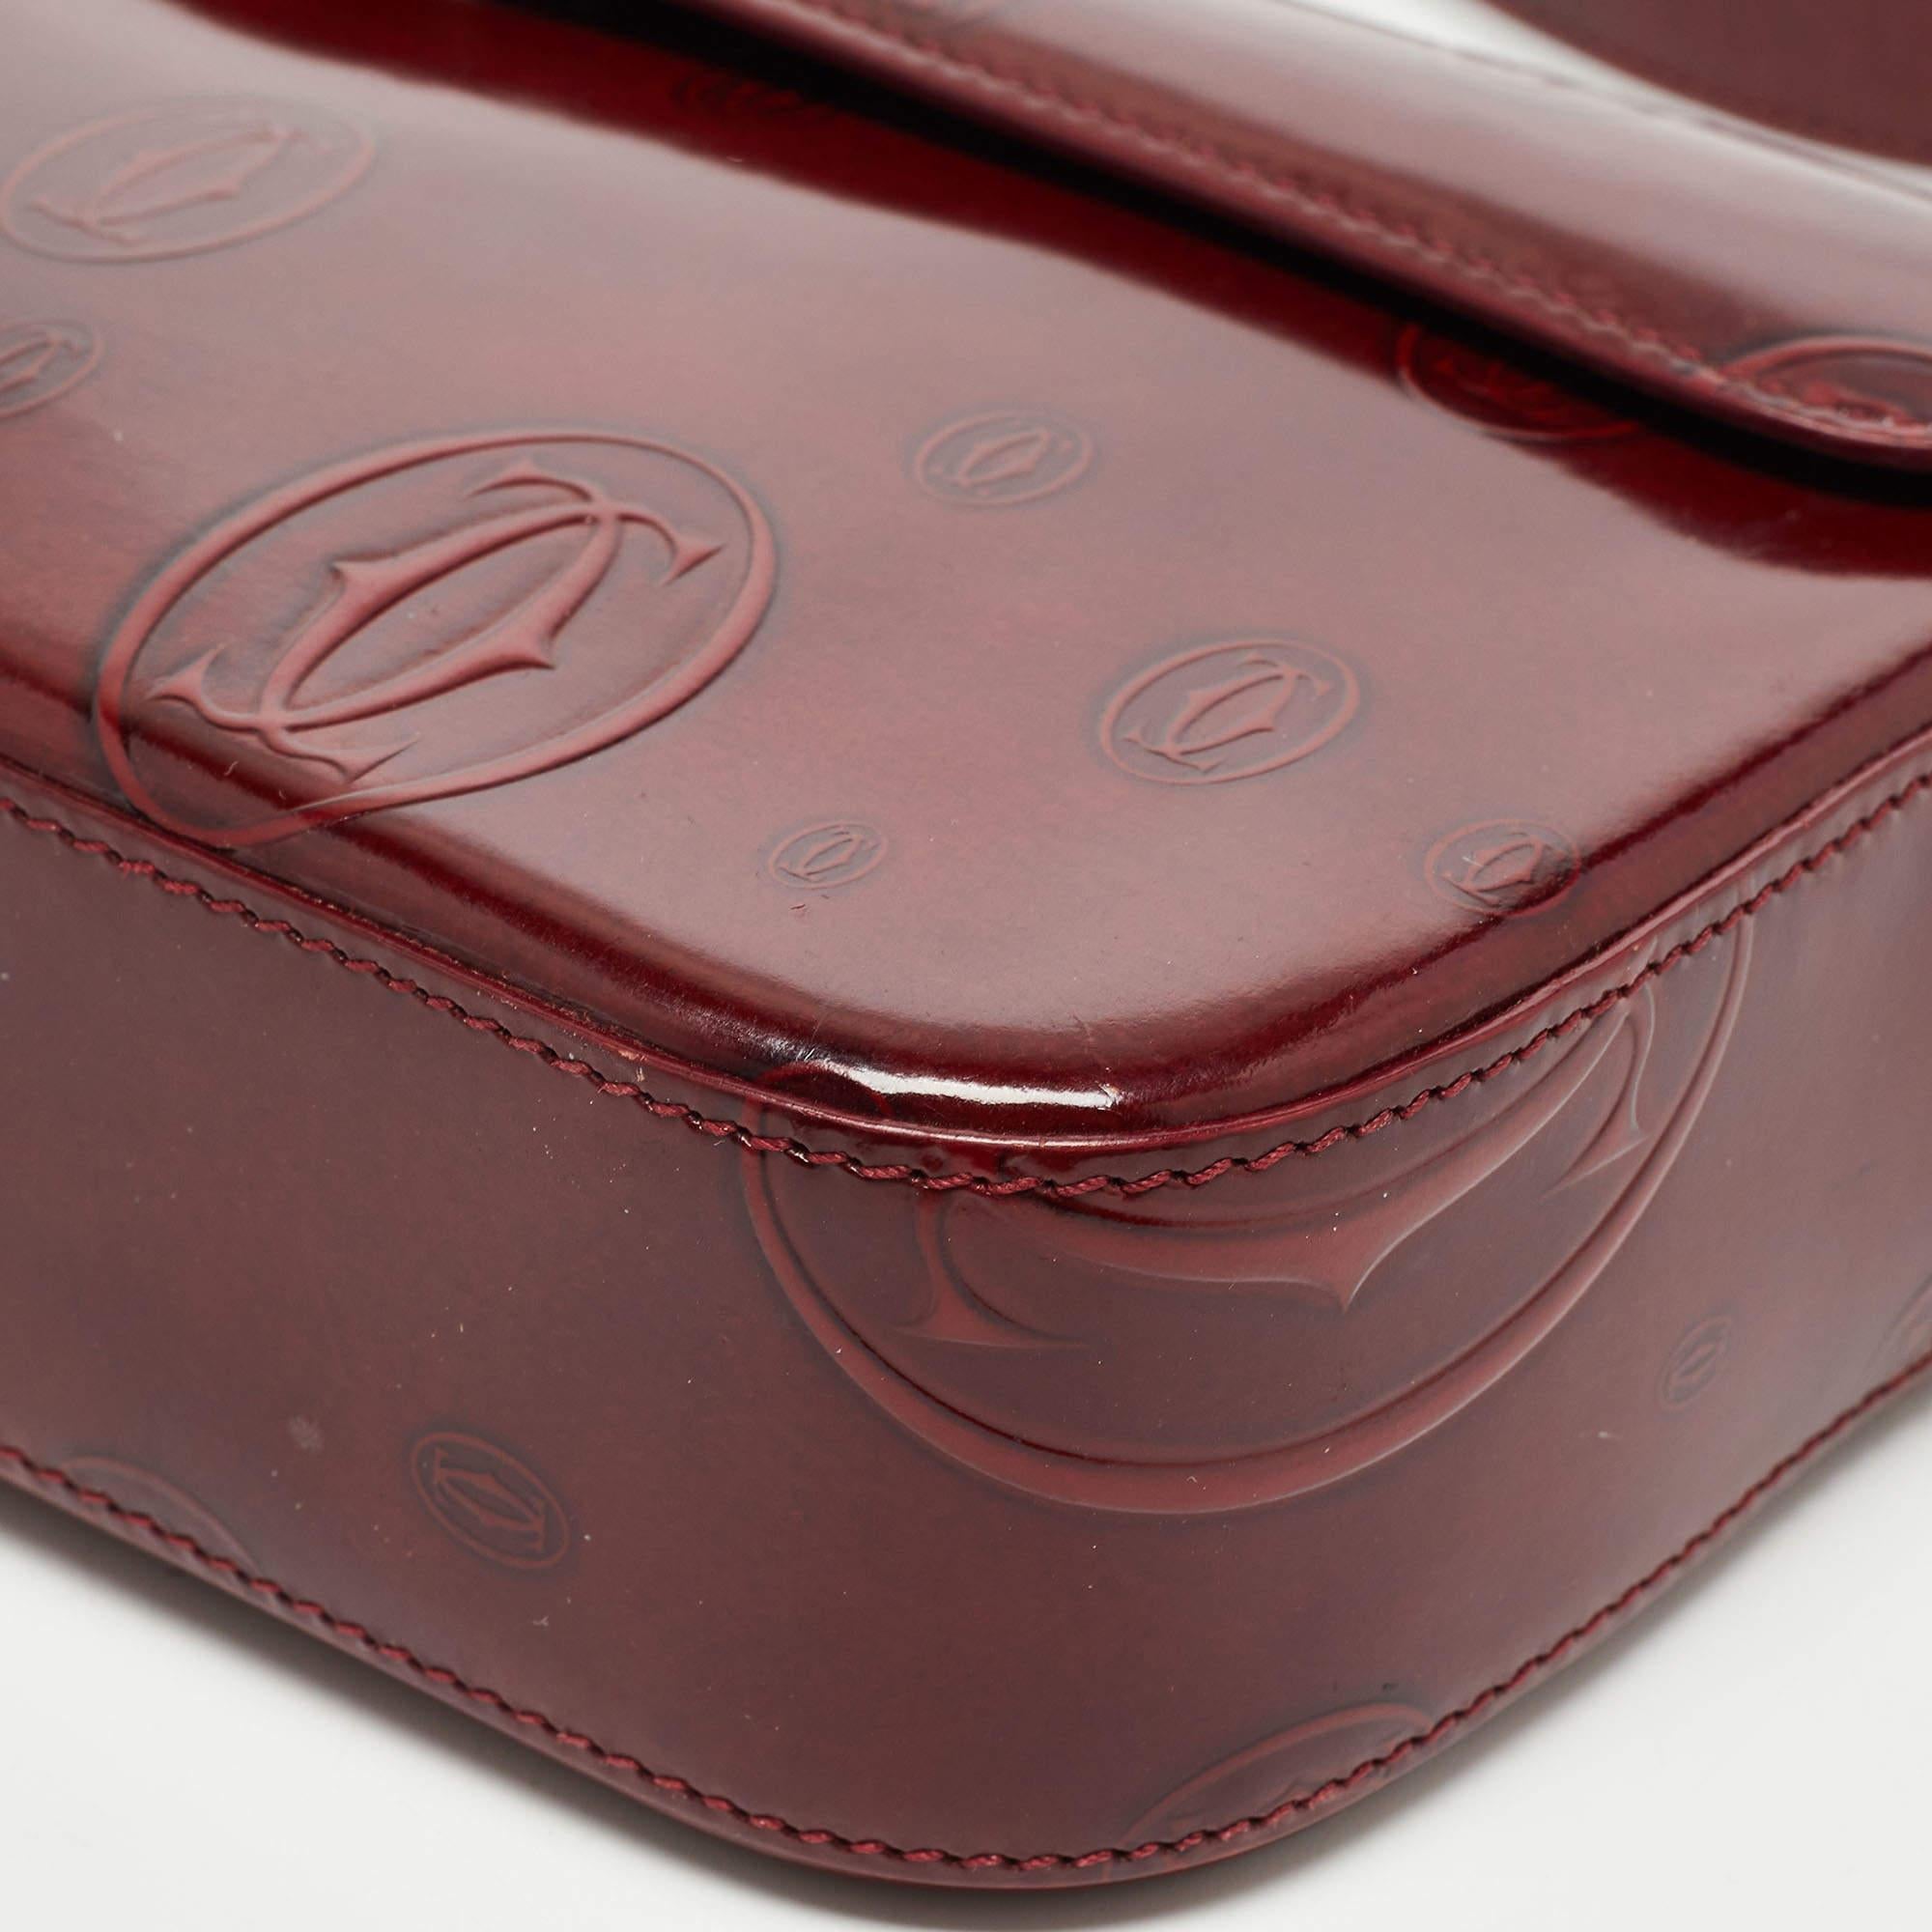 Cartier Burgundy Patent Leather Happy Birthday Baguette Bag 3